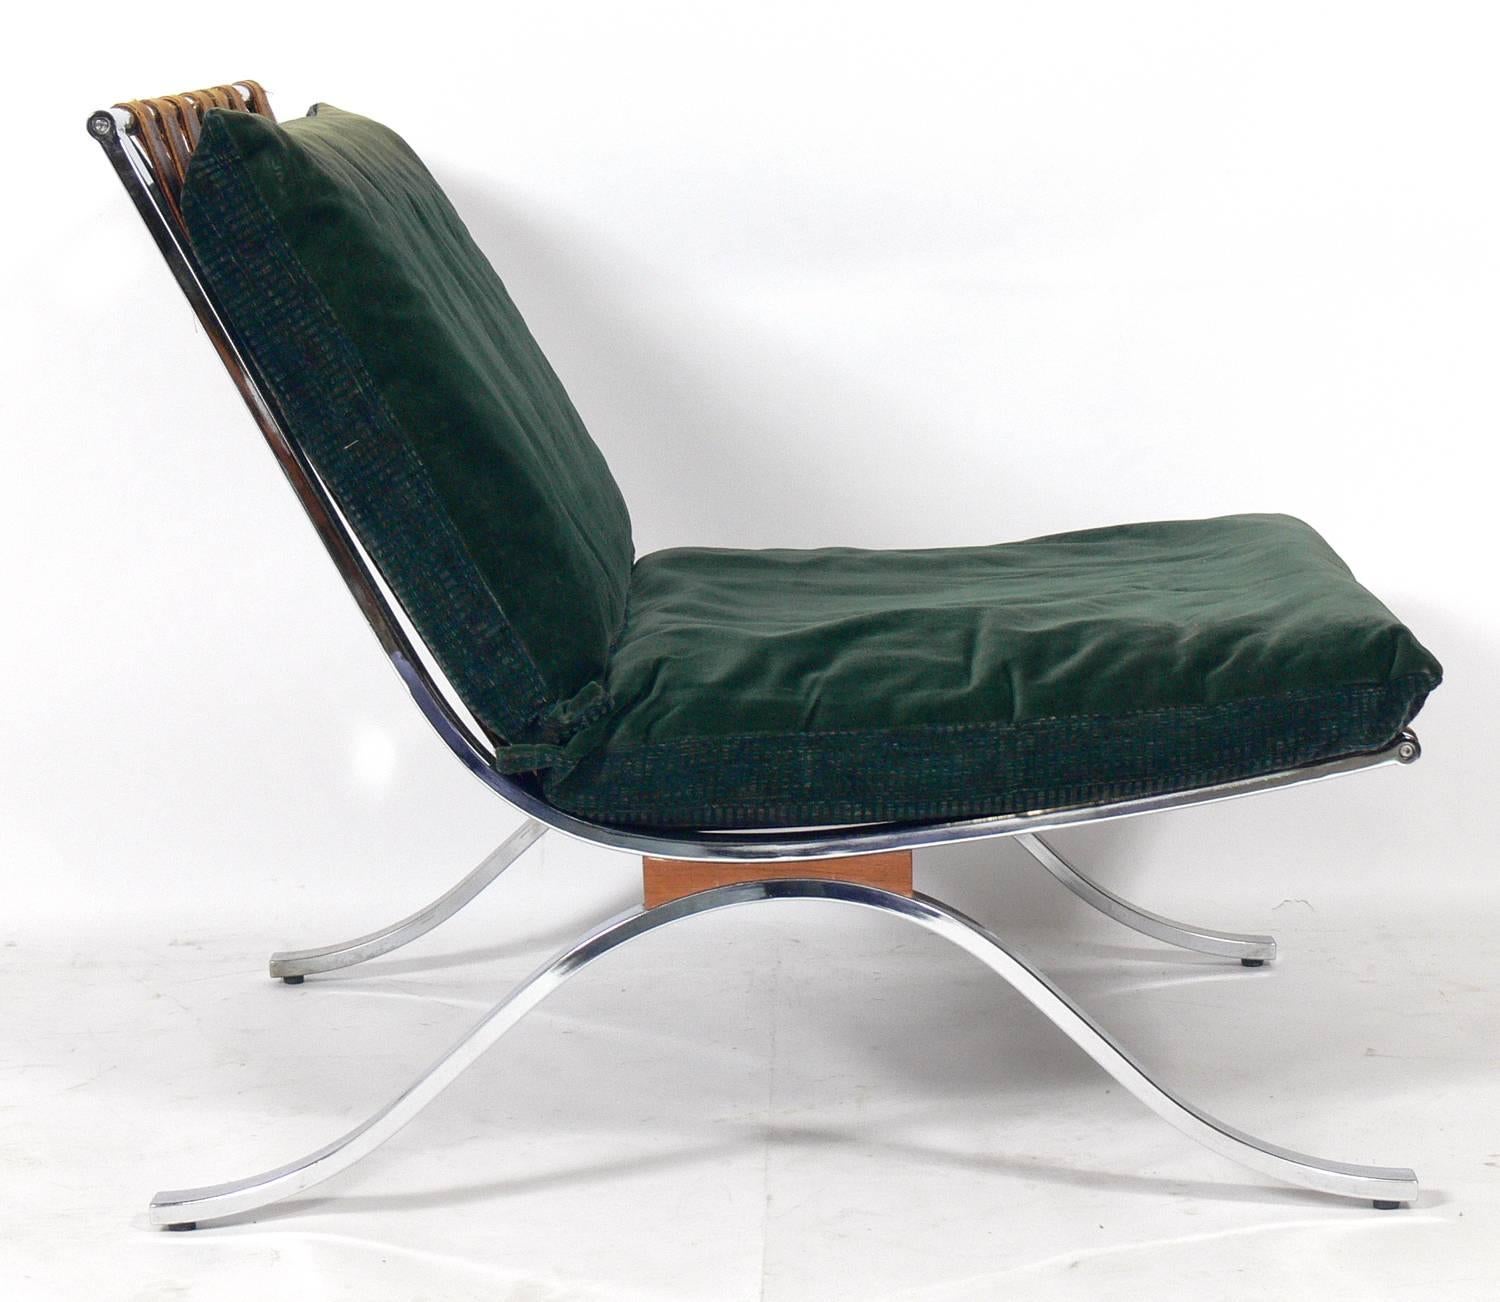 Italian chrome lounge chair, imported by Stendig from Italy, circa 1960s. This chair's straps and cushions are currently being reupholstered and can be completed in your fabric. The price noted below includes reupholstery in your fabric.